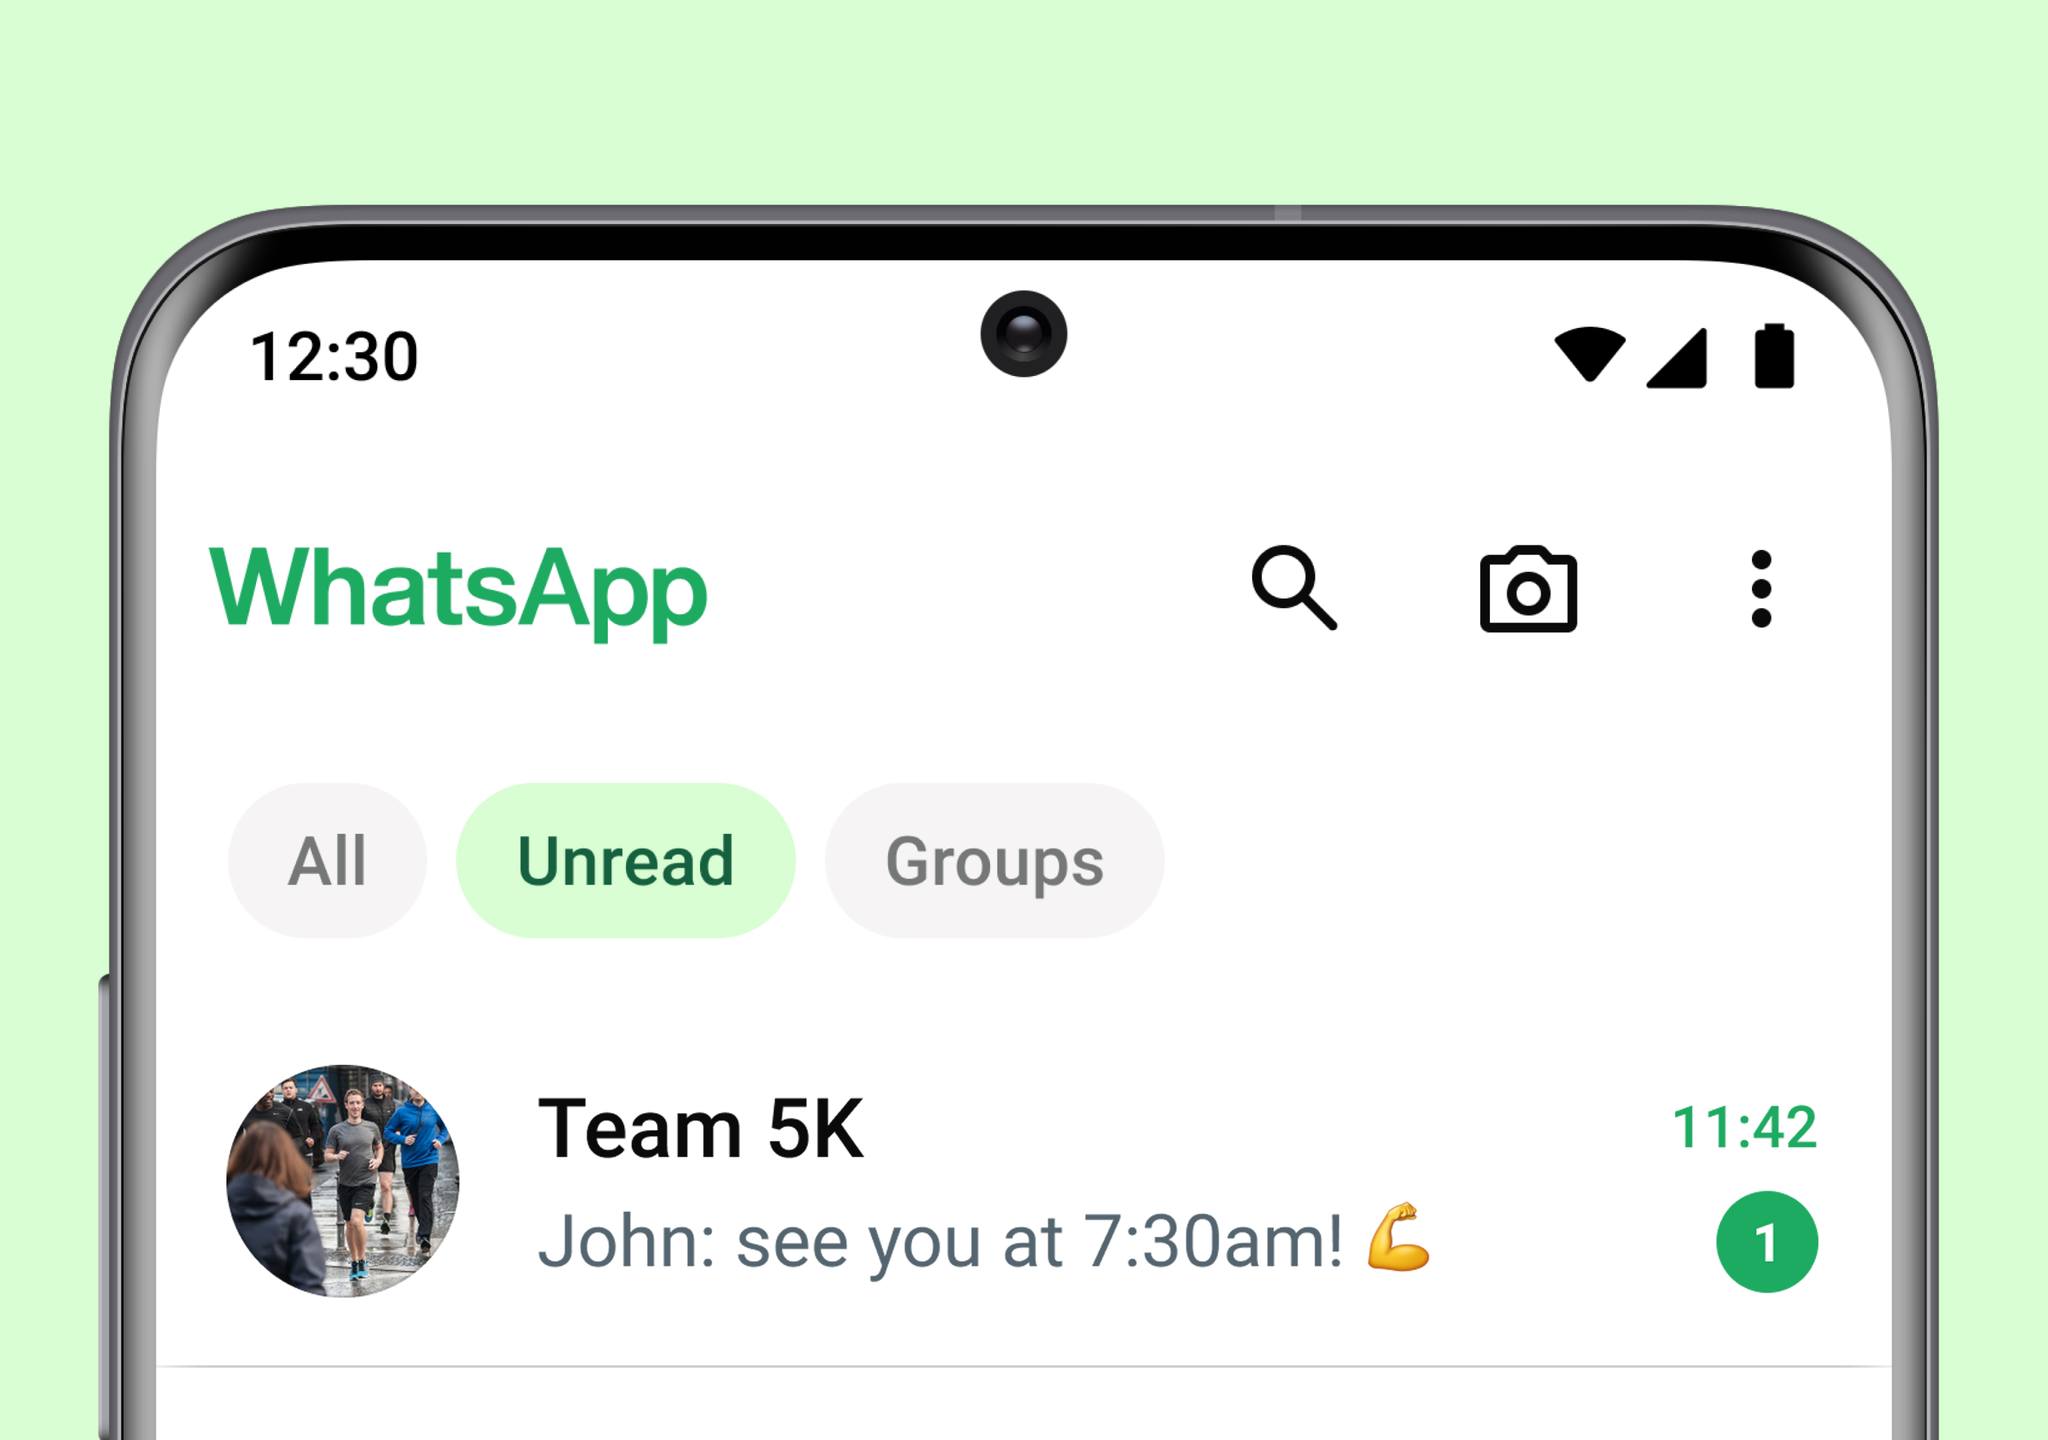 WhatsApp: New filters for chat messages saves a lot of time